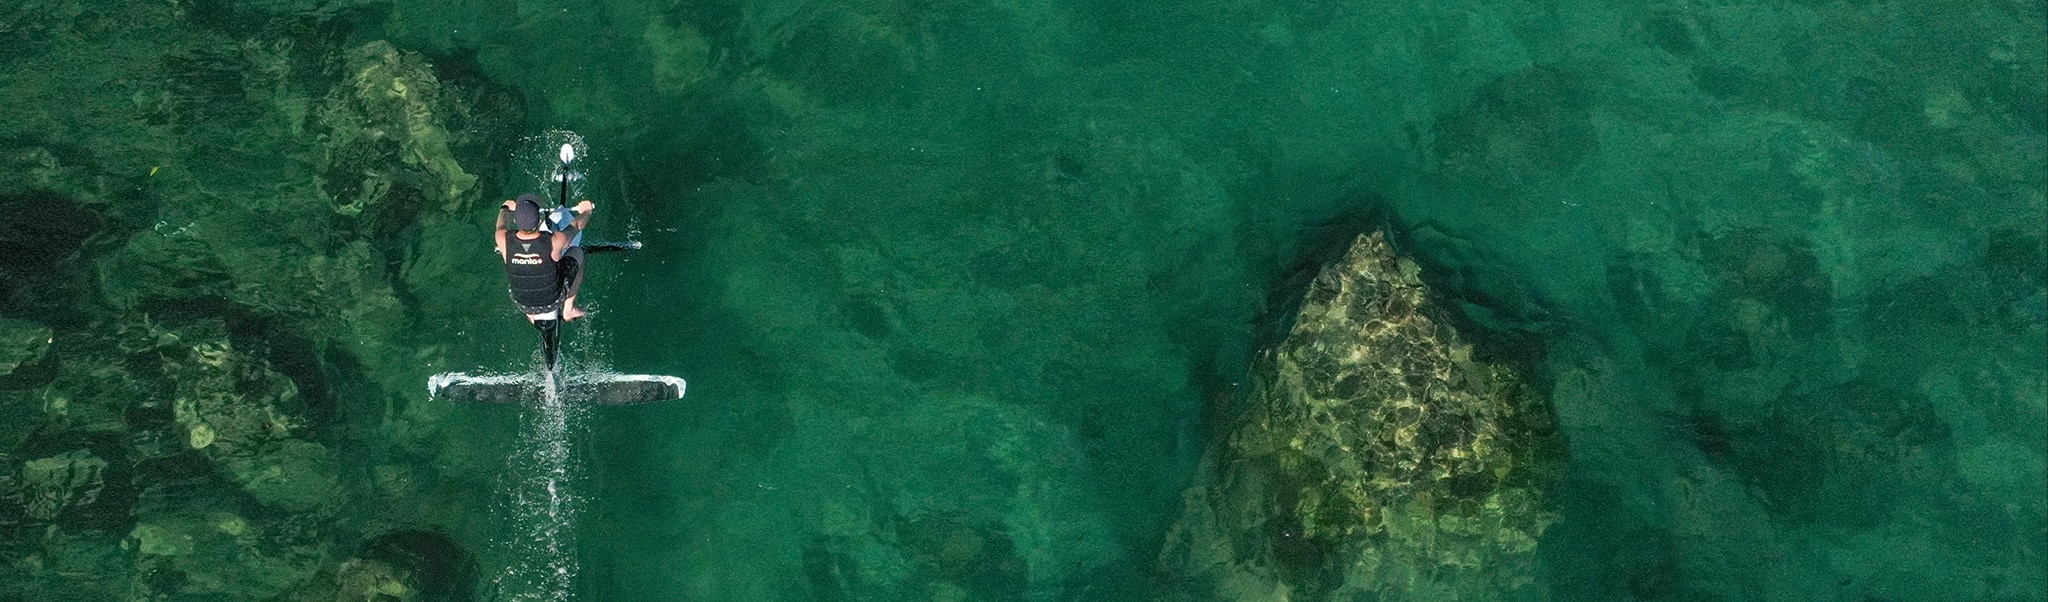 Top view of a male riding a hydrofoiler Xe-1 on clear water ocean showing rocks on the bottom